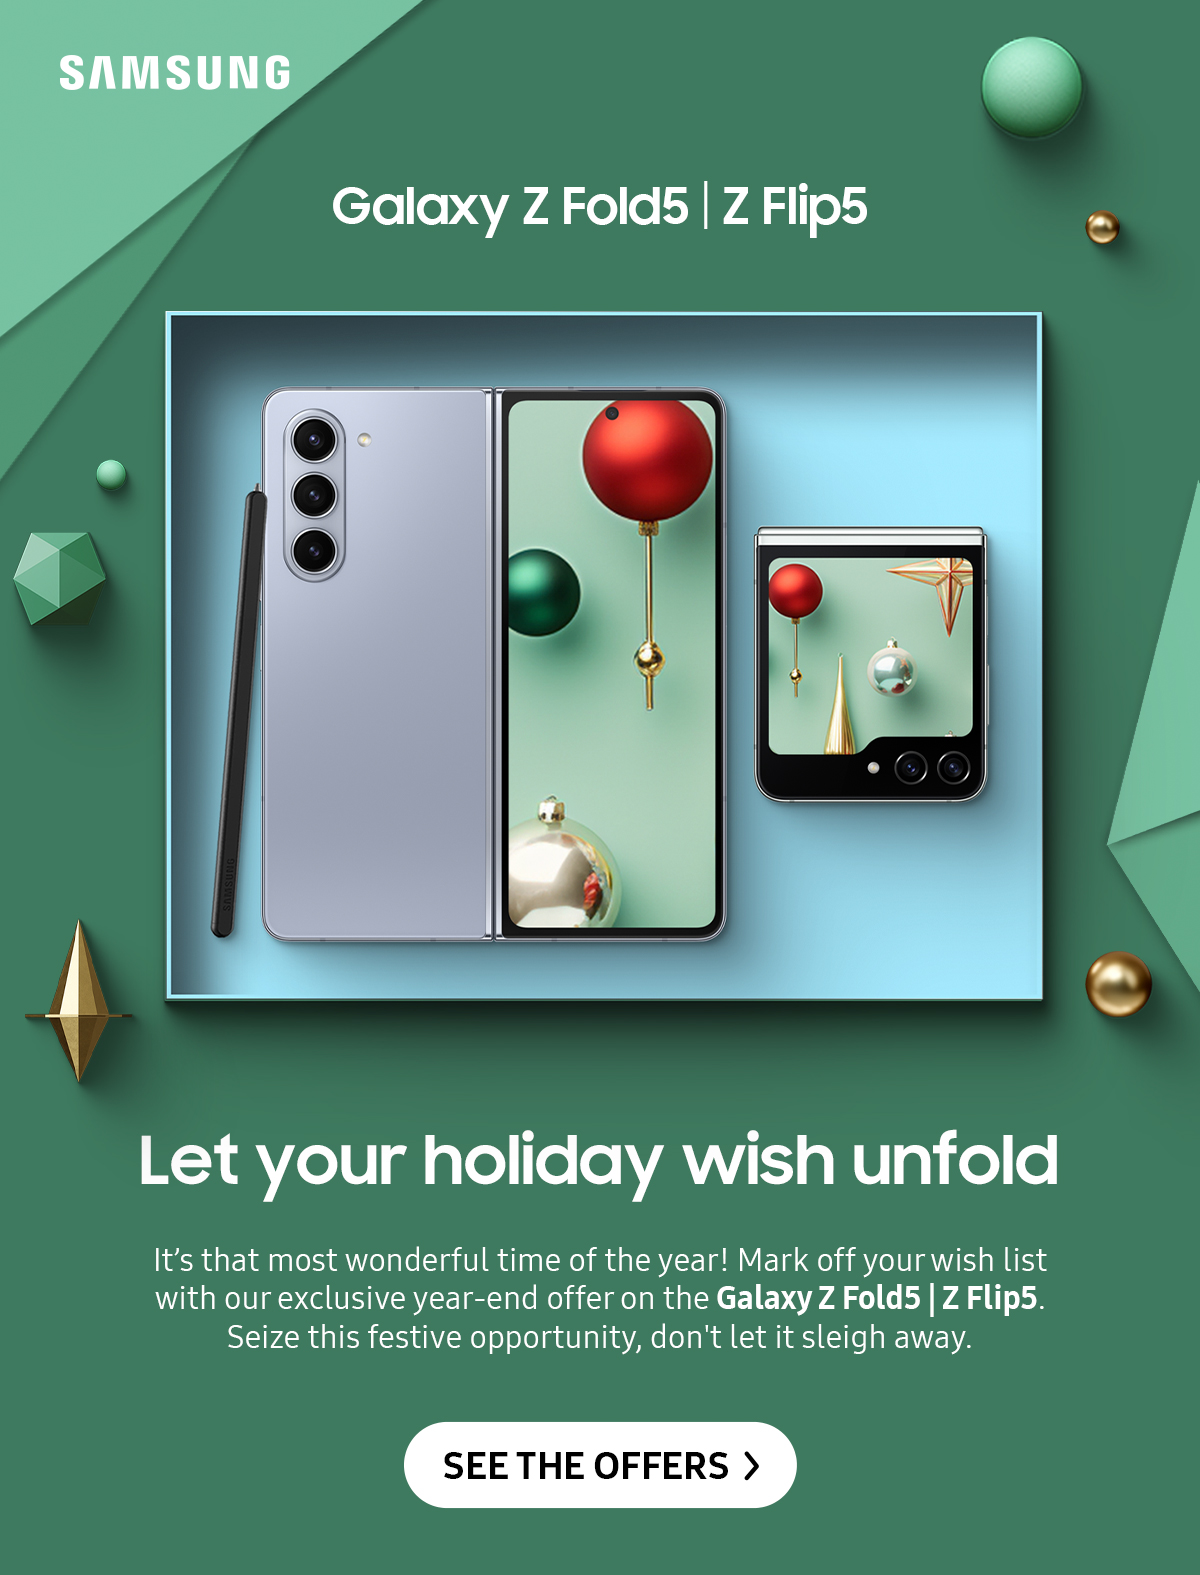 Let your holiday wish unfold | It's that most wonderful time of the year! Mark off your wish list with our exclusive year-end offer on the Galaxy Z Fold5 | Z Flip5. Seize this festive opportunity, don't let it sleigh away. Click here to see the offers!